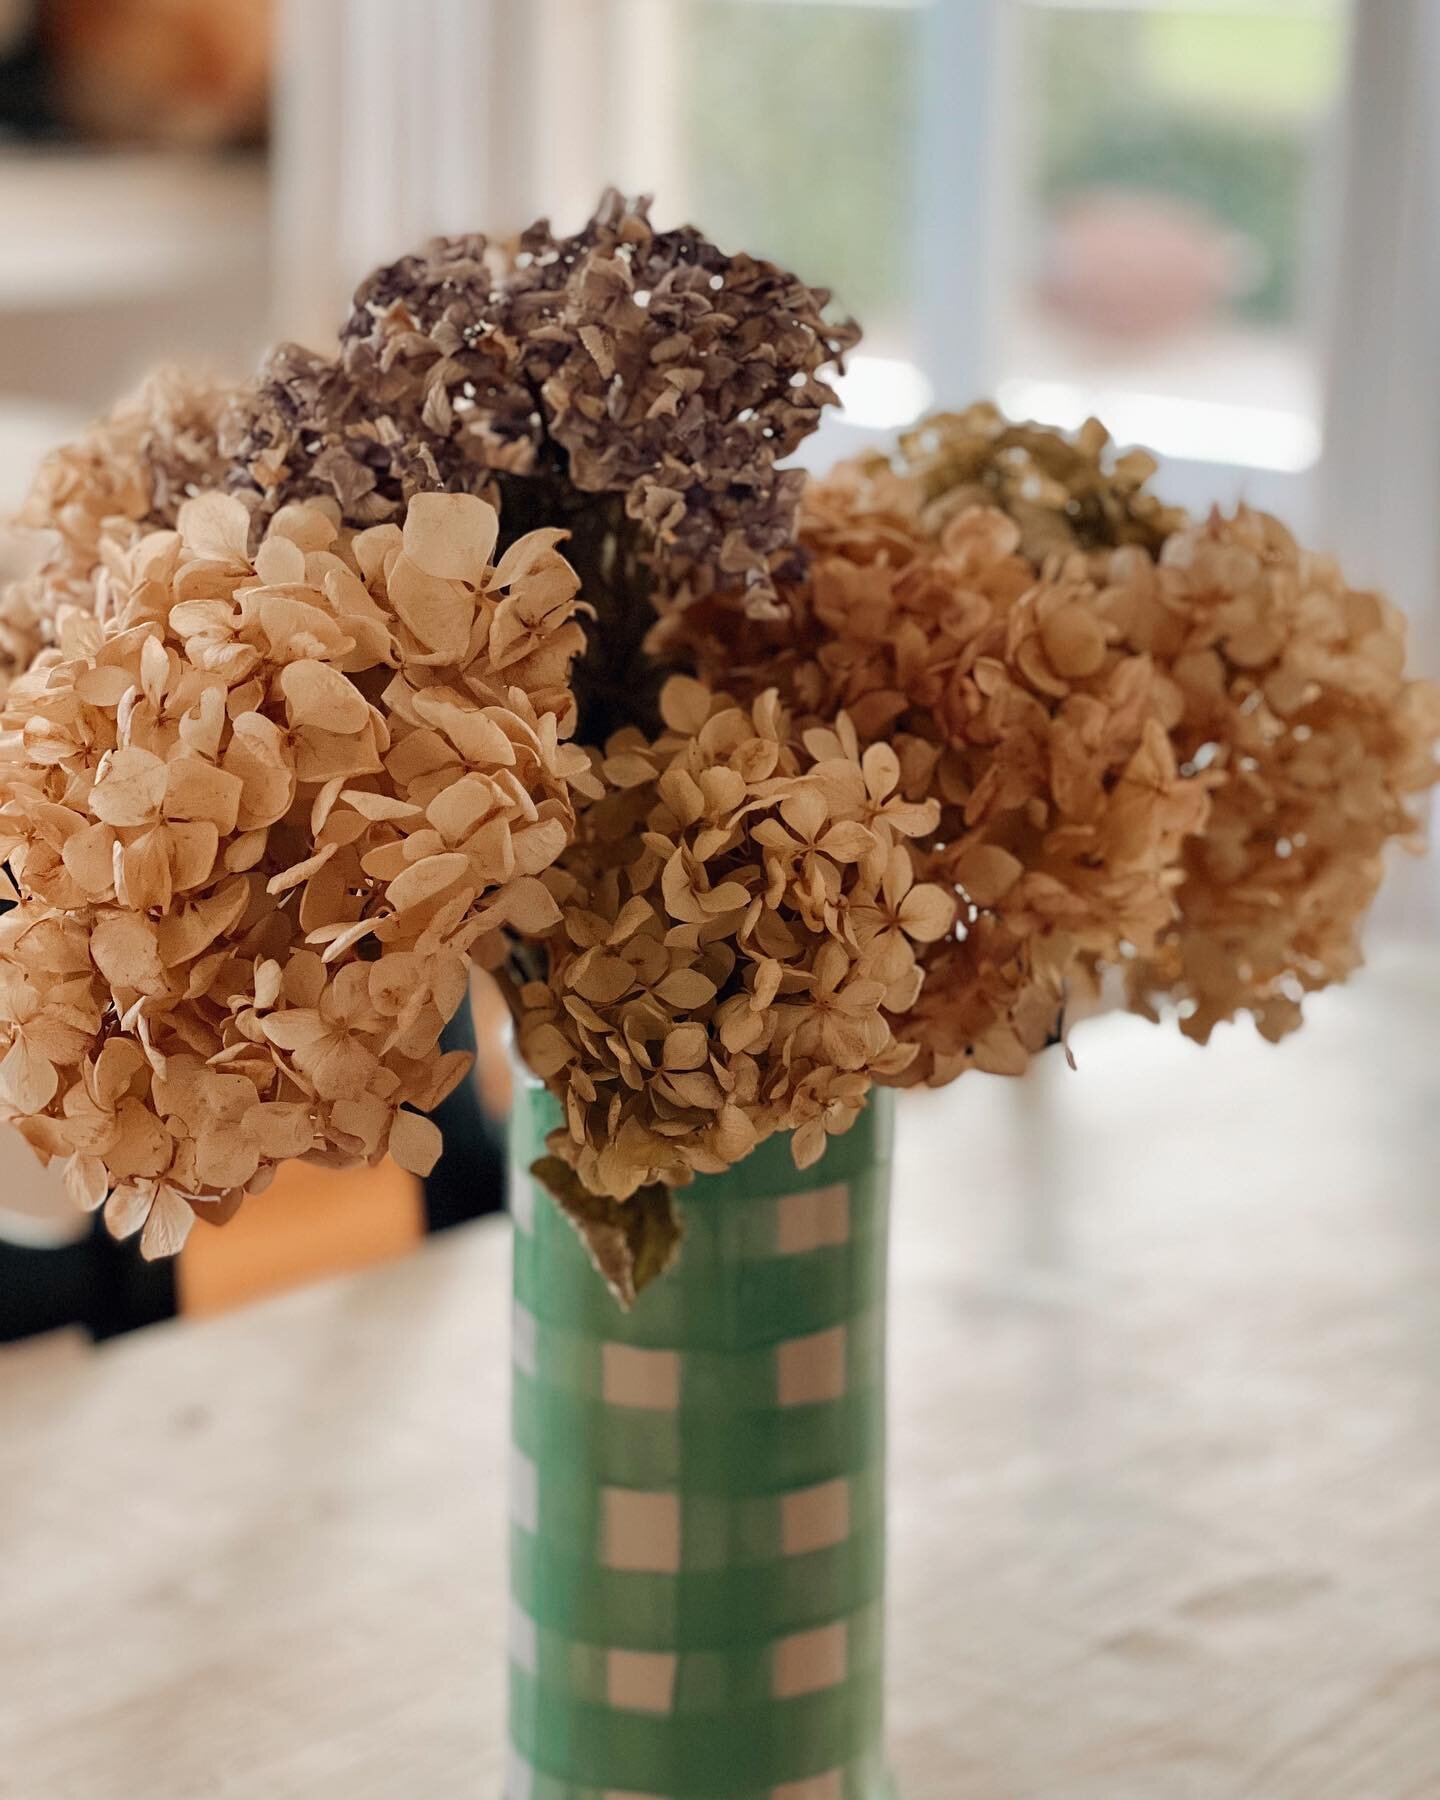 Dried up hydrangeas from the garden @cressyhouseestate in a beautiful vase by the talented @noss_and_co looking beautiful in the home of Chatsworth ✨

@noss_and_co is now fully booked for the vase workshop in September here @chatsworth_tasmania ! Kee